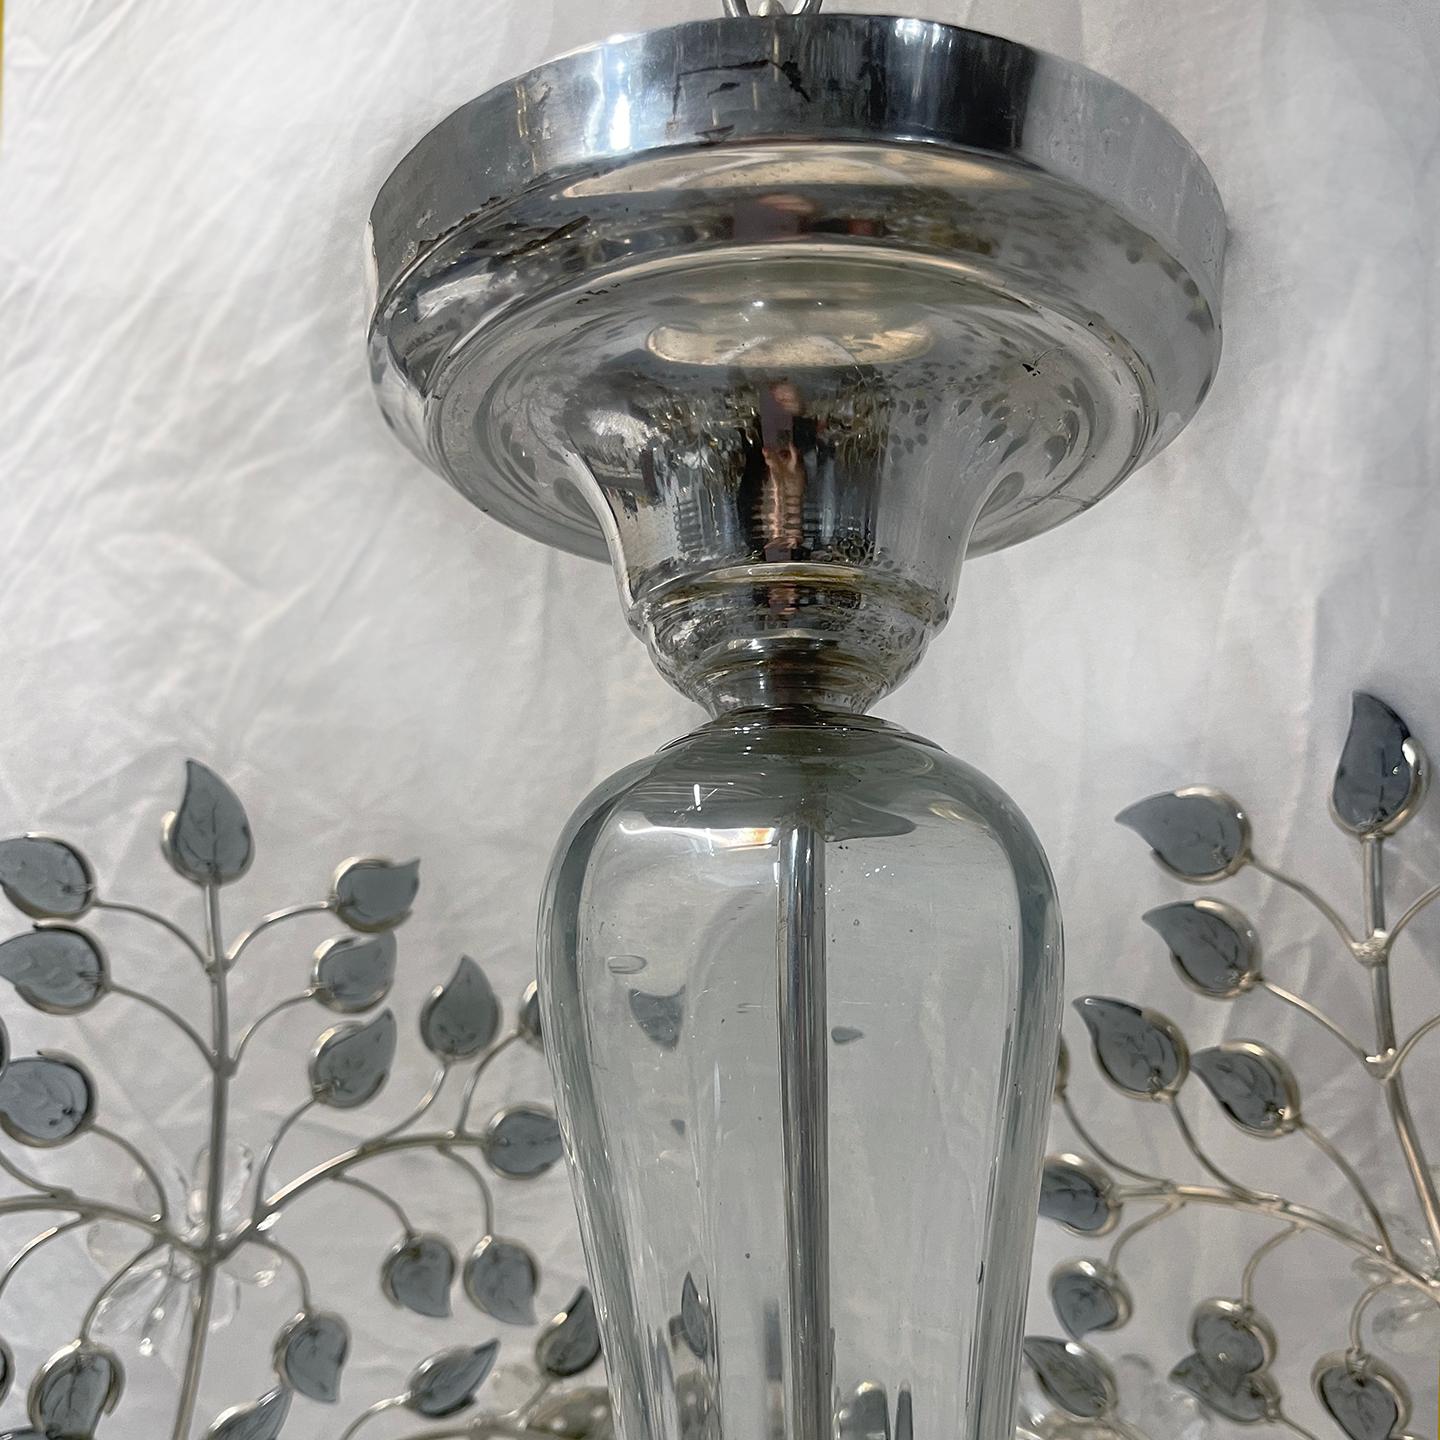 French circa 1950's silver-plated light fixture with smoke colored glass leaves, crystal flowers and eight interior lights.

Measurements:
Diameter: 30